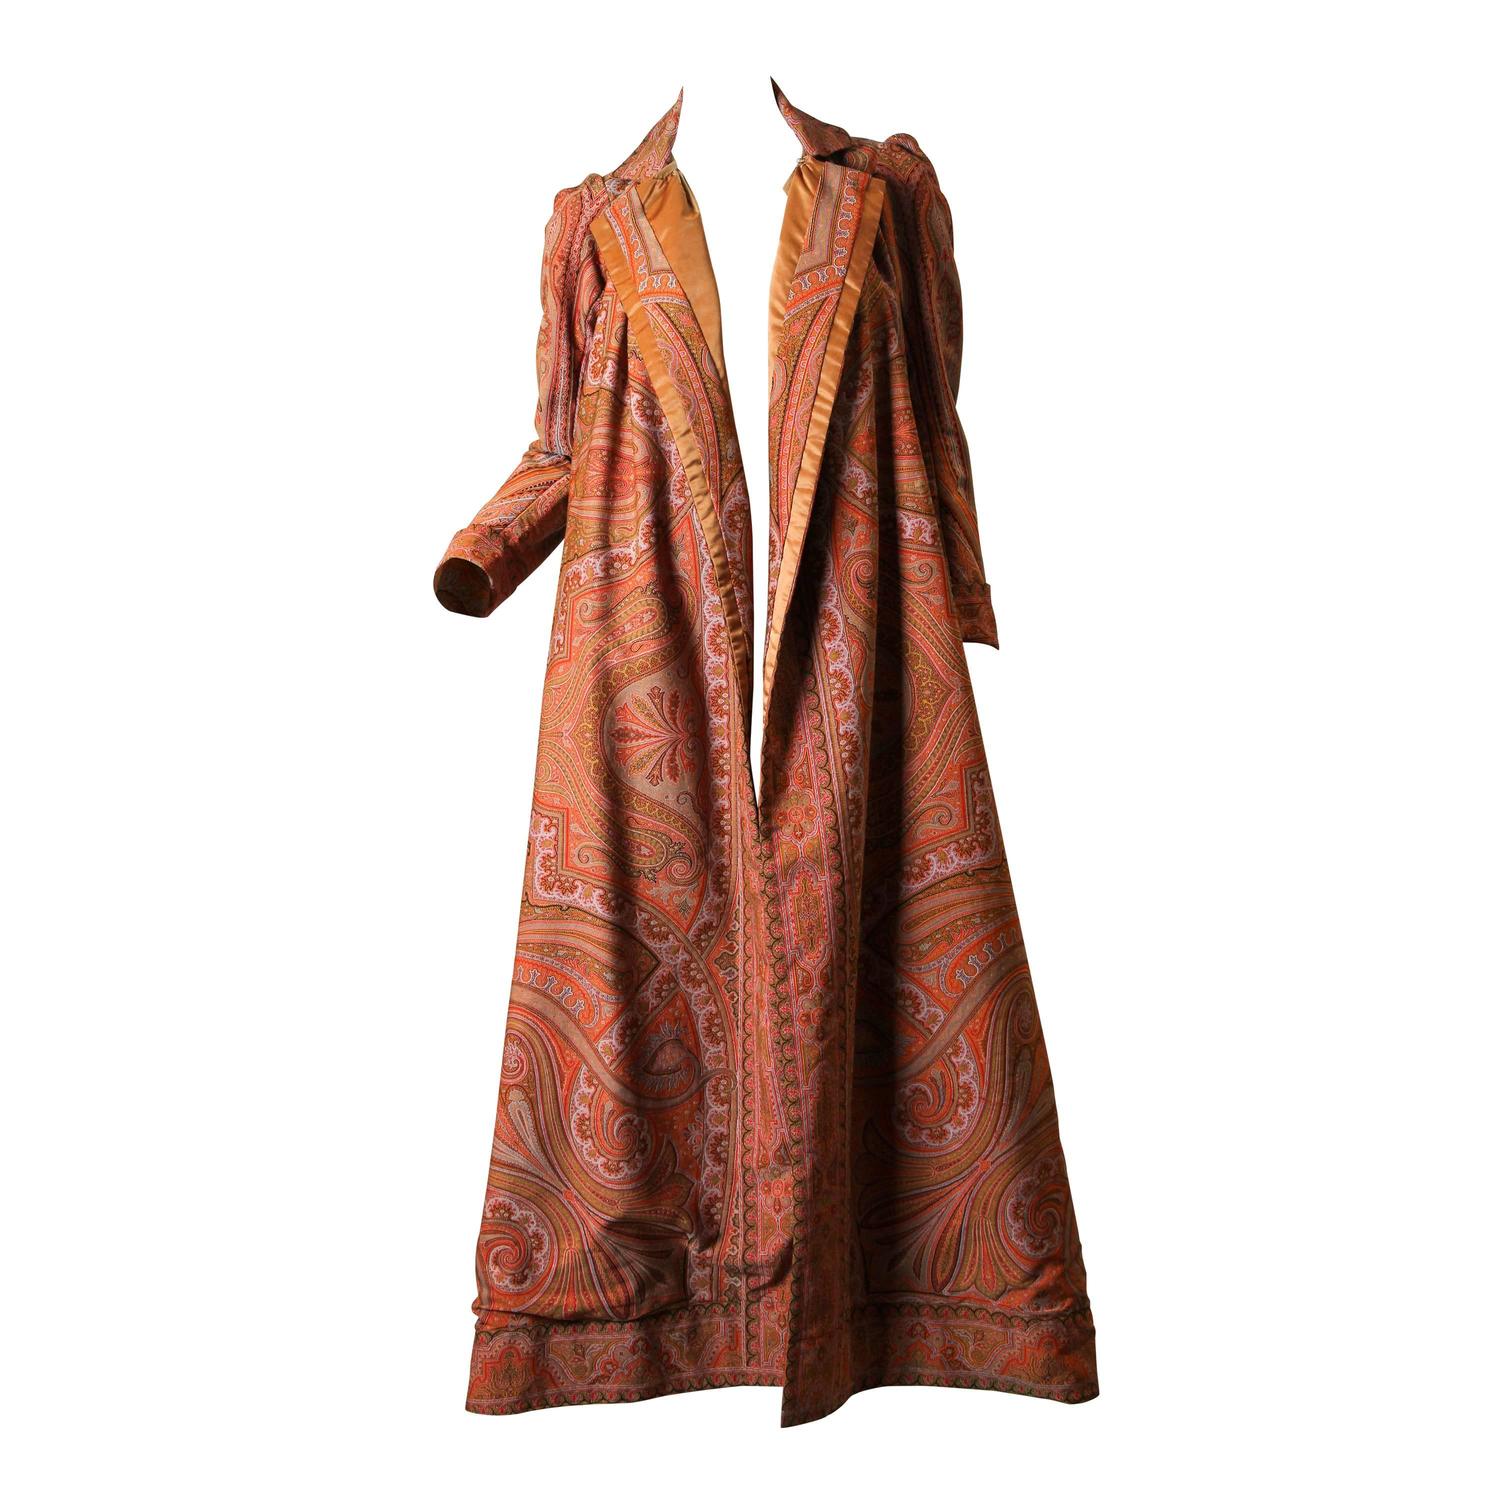 Victorian Paisley Coat For Sale at 1stdibs